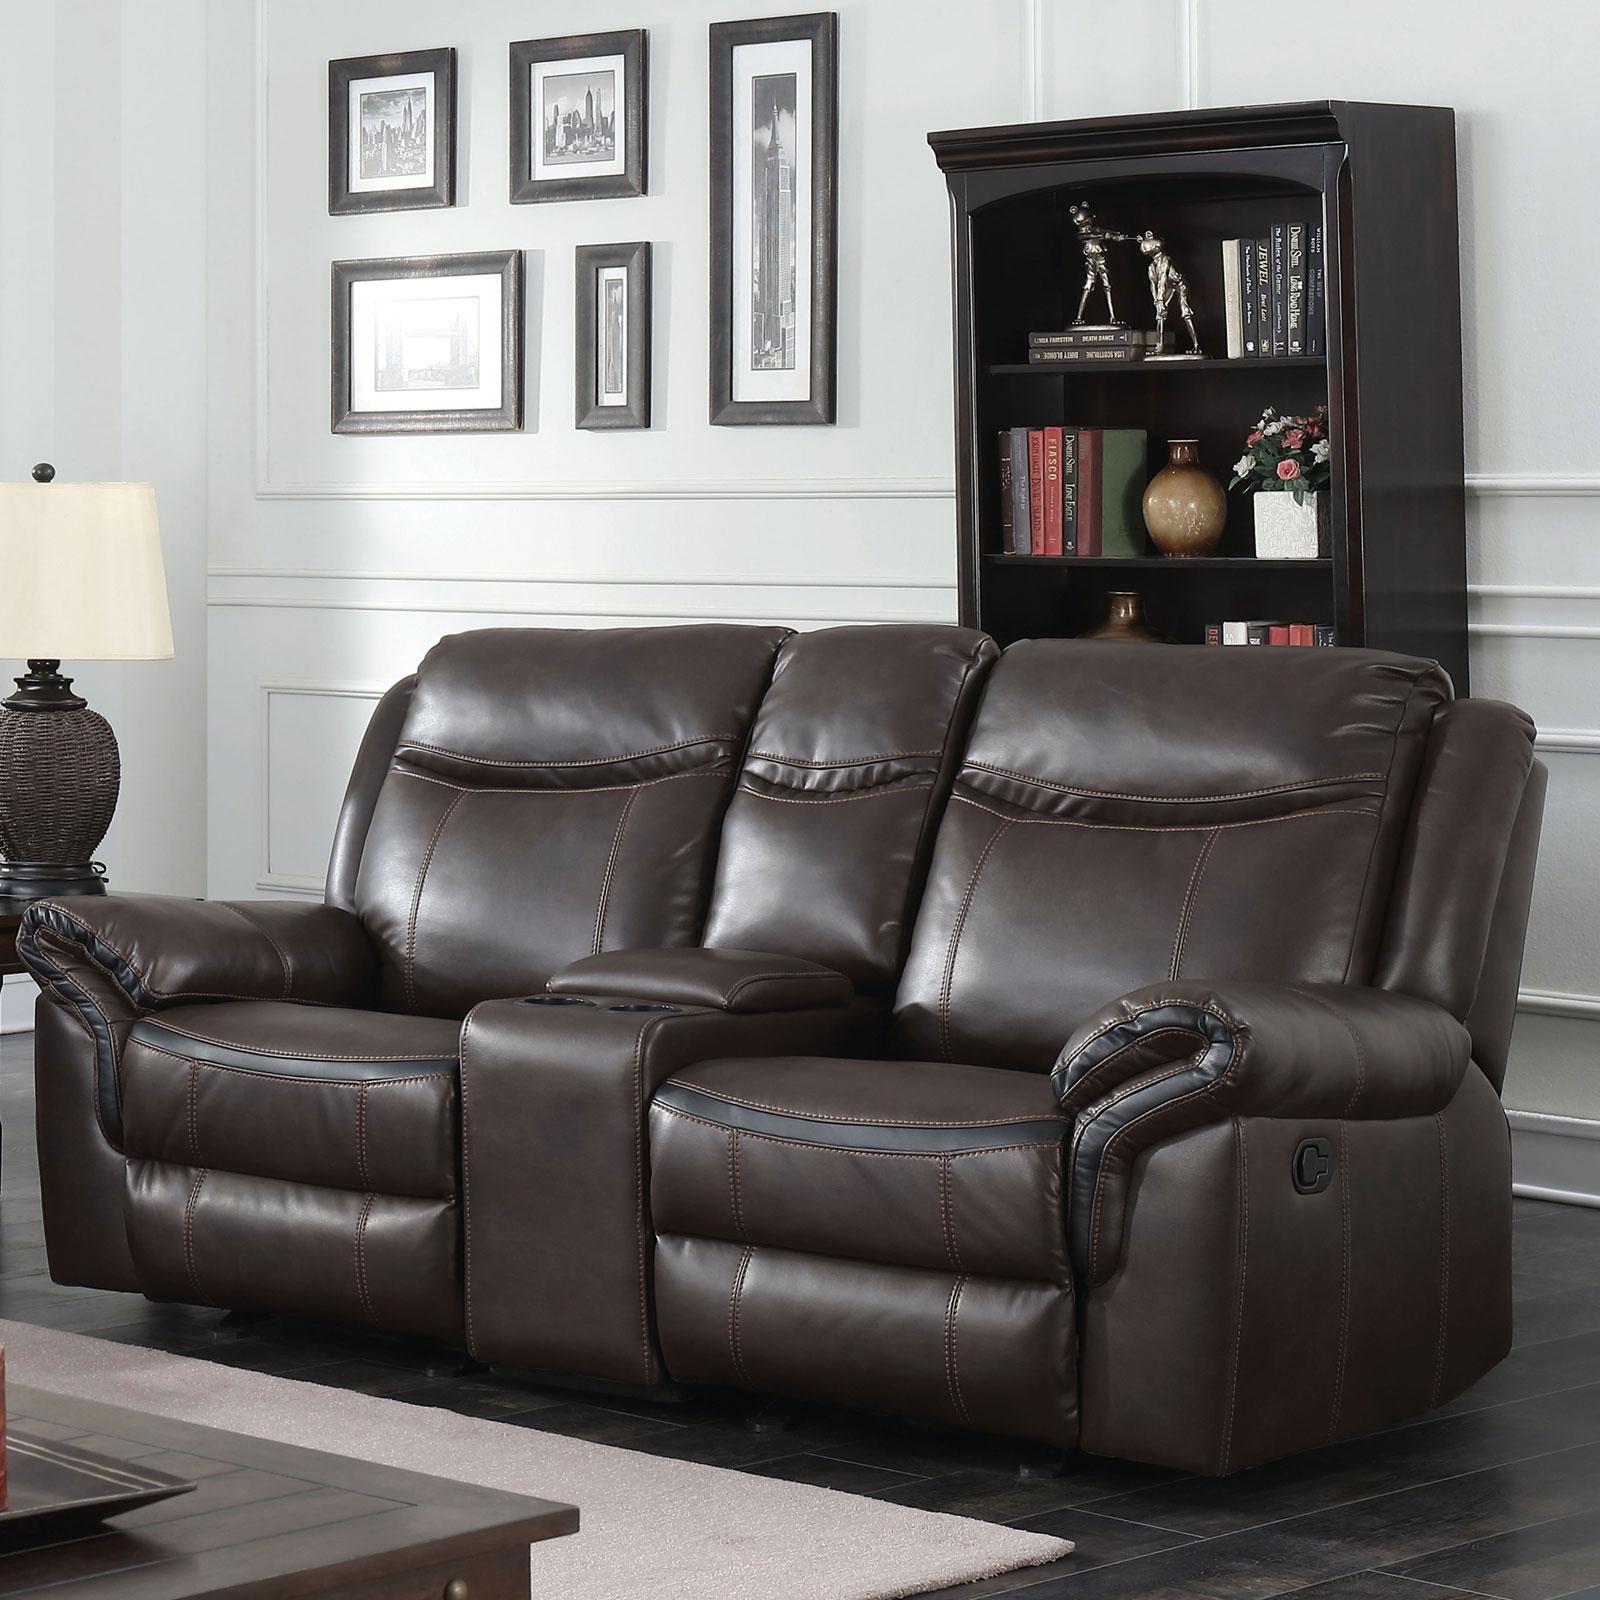 Transitional Loveseat CHENAI CM6297-LV CM6297-LV in Brown Faux Leather